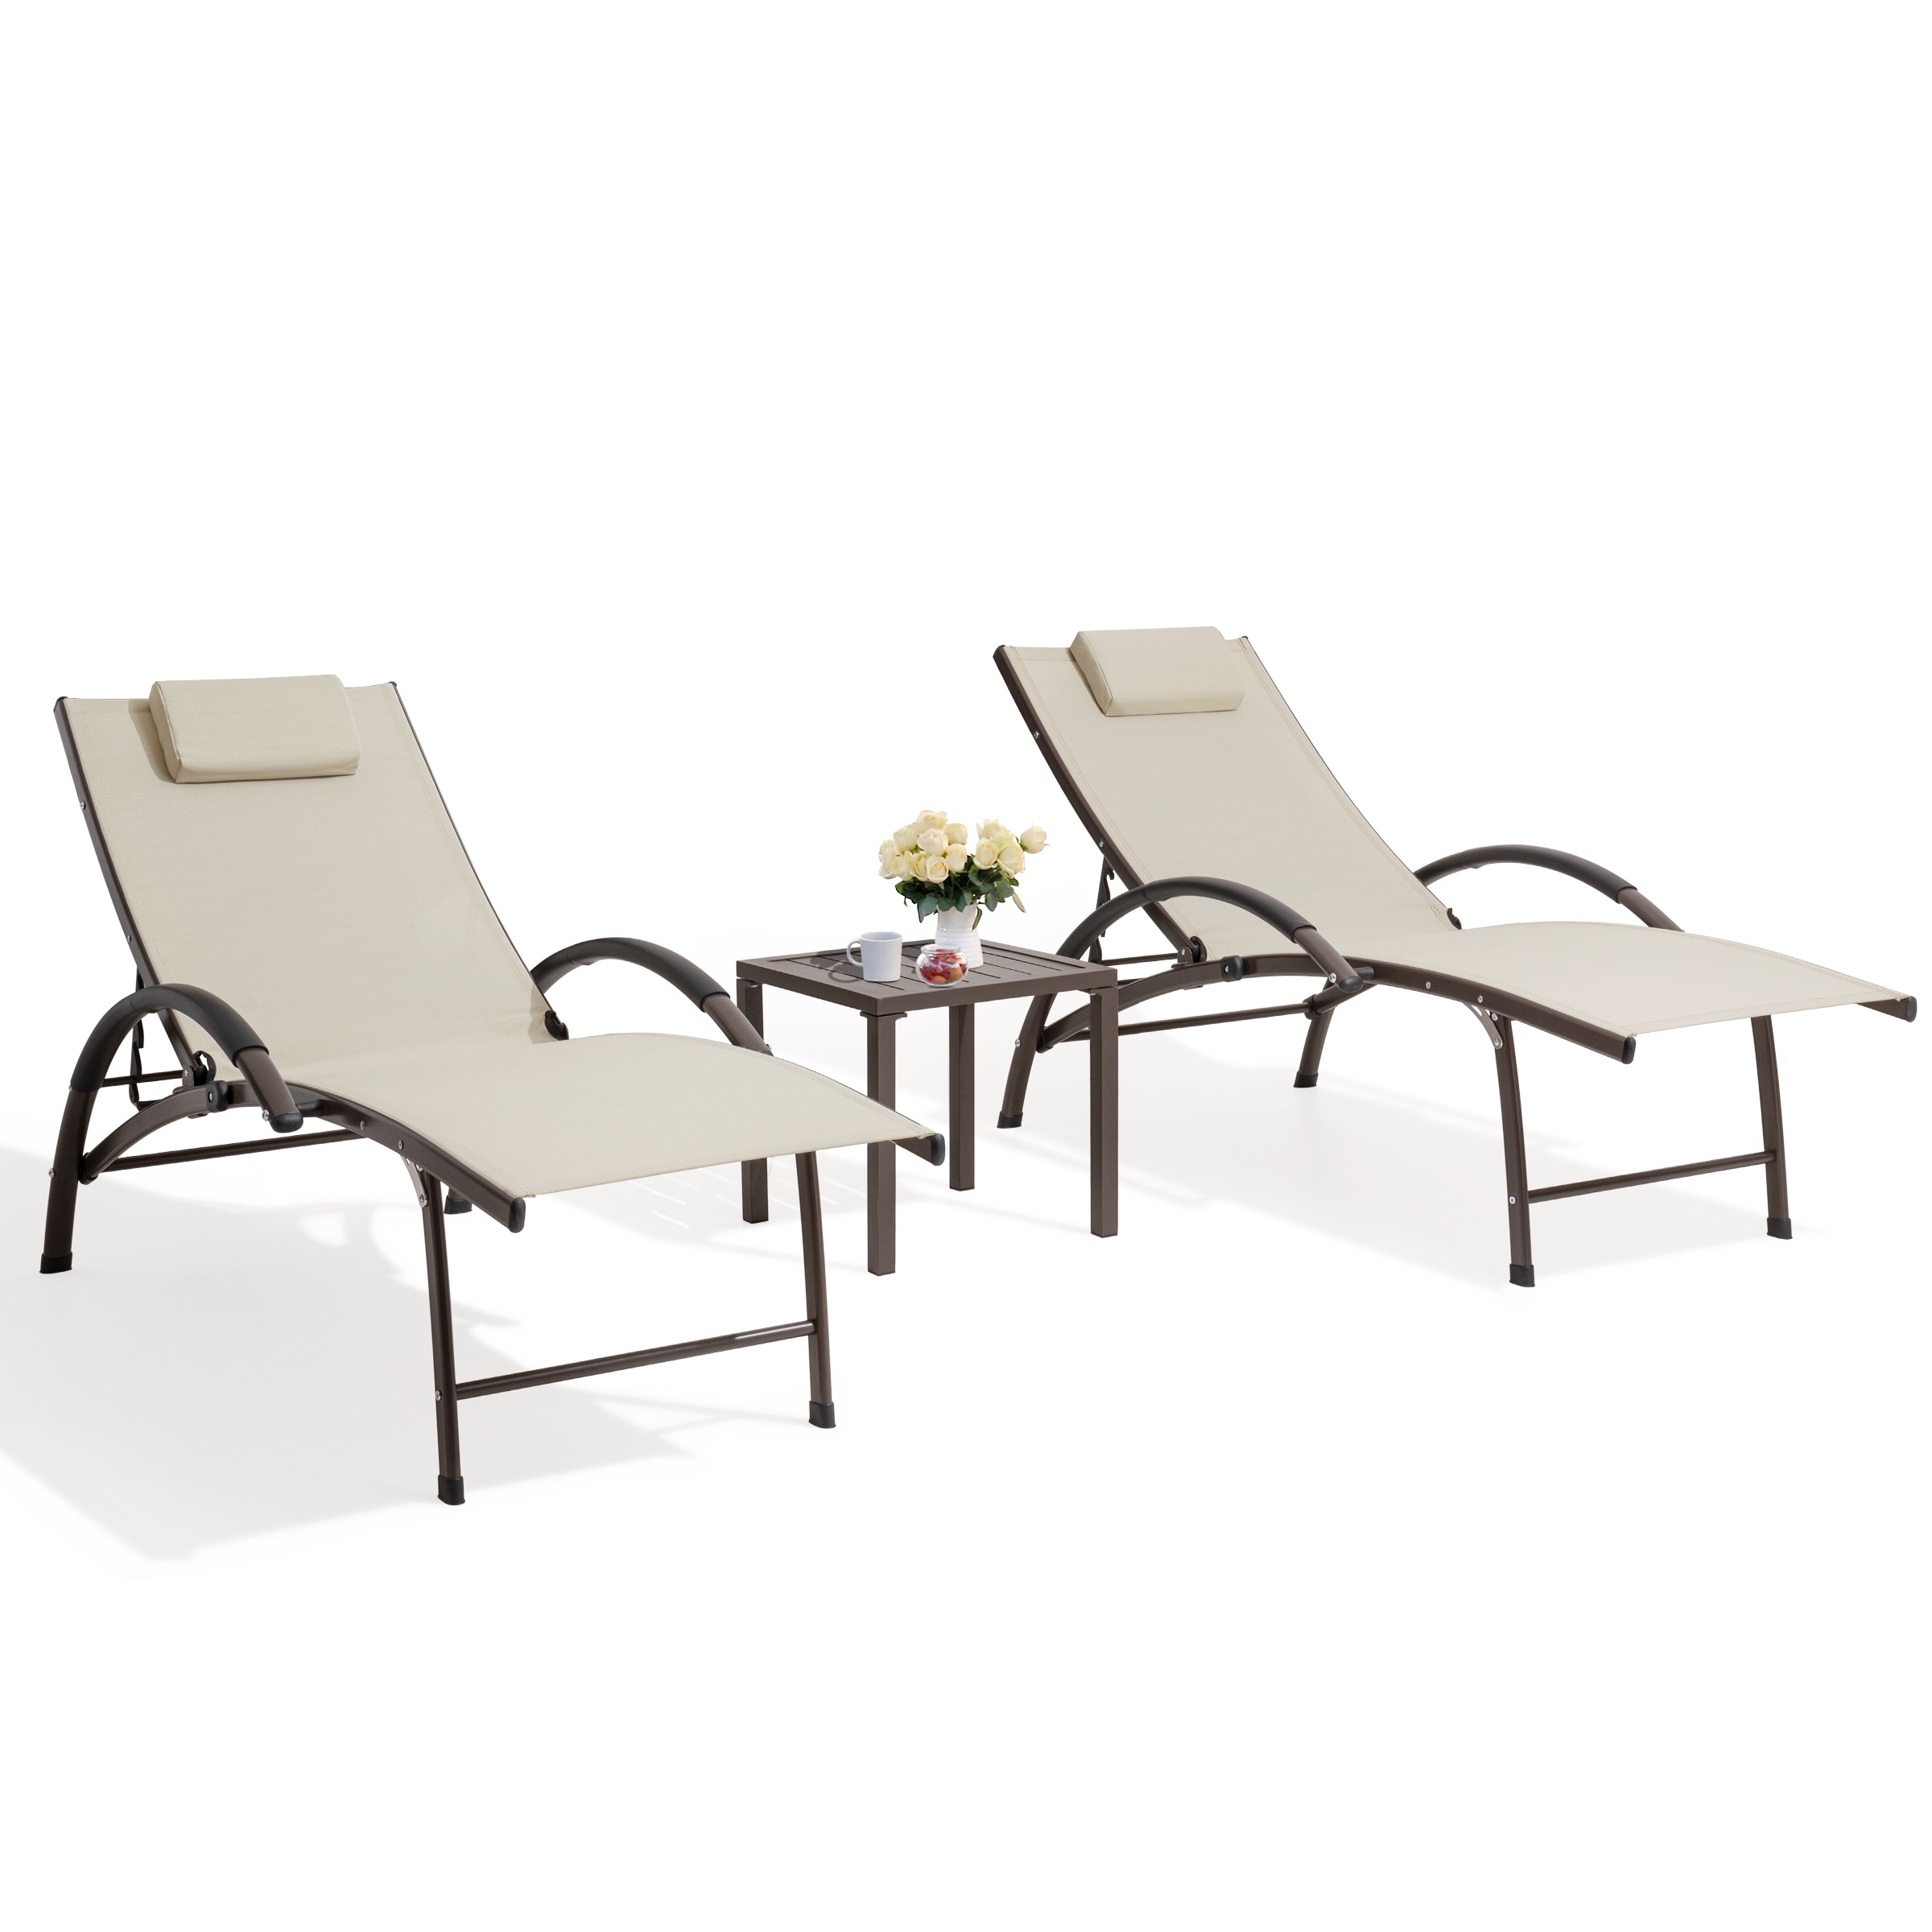 Crestlive Products Outdoor Aluminum Folding Adjustable Reclining Chaise Lounge Chairs And Table Set(set Of 3)